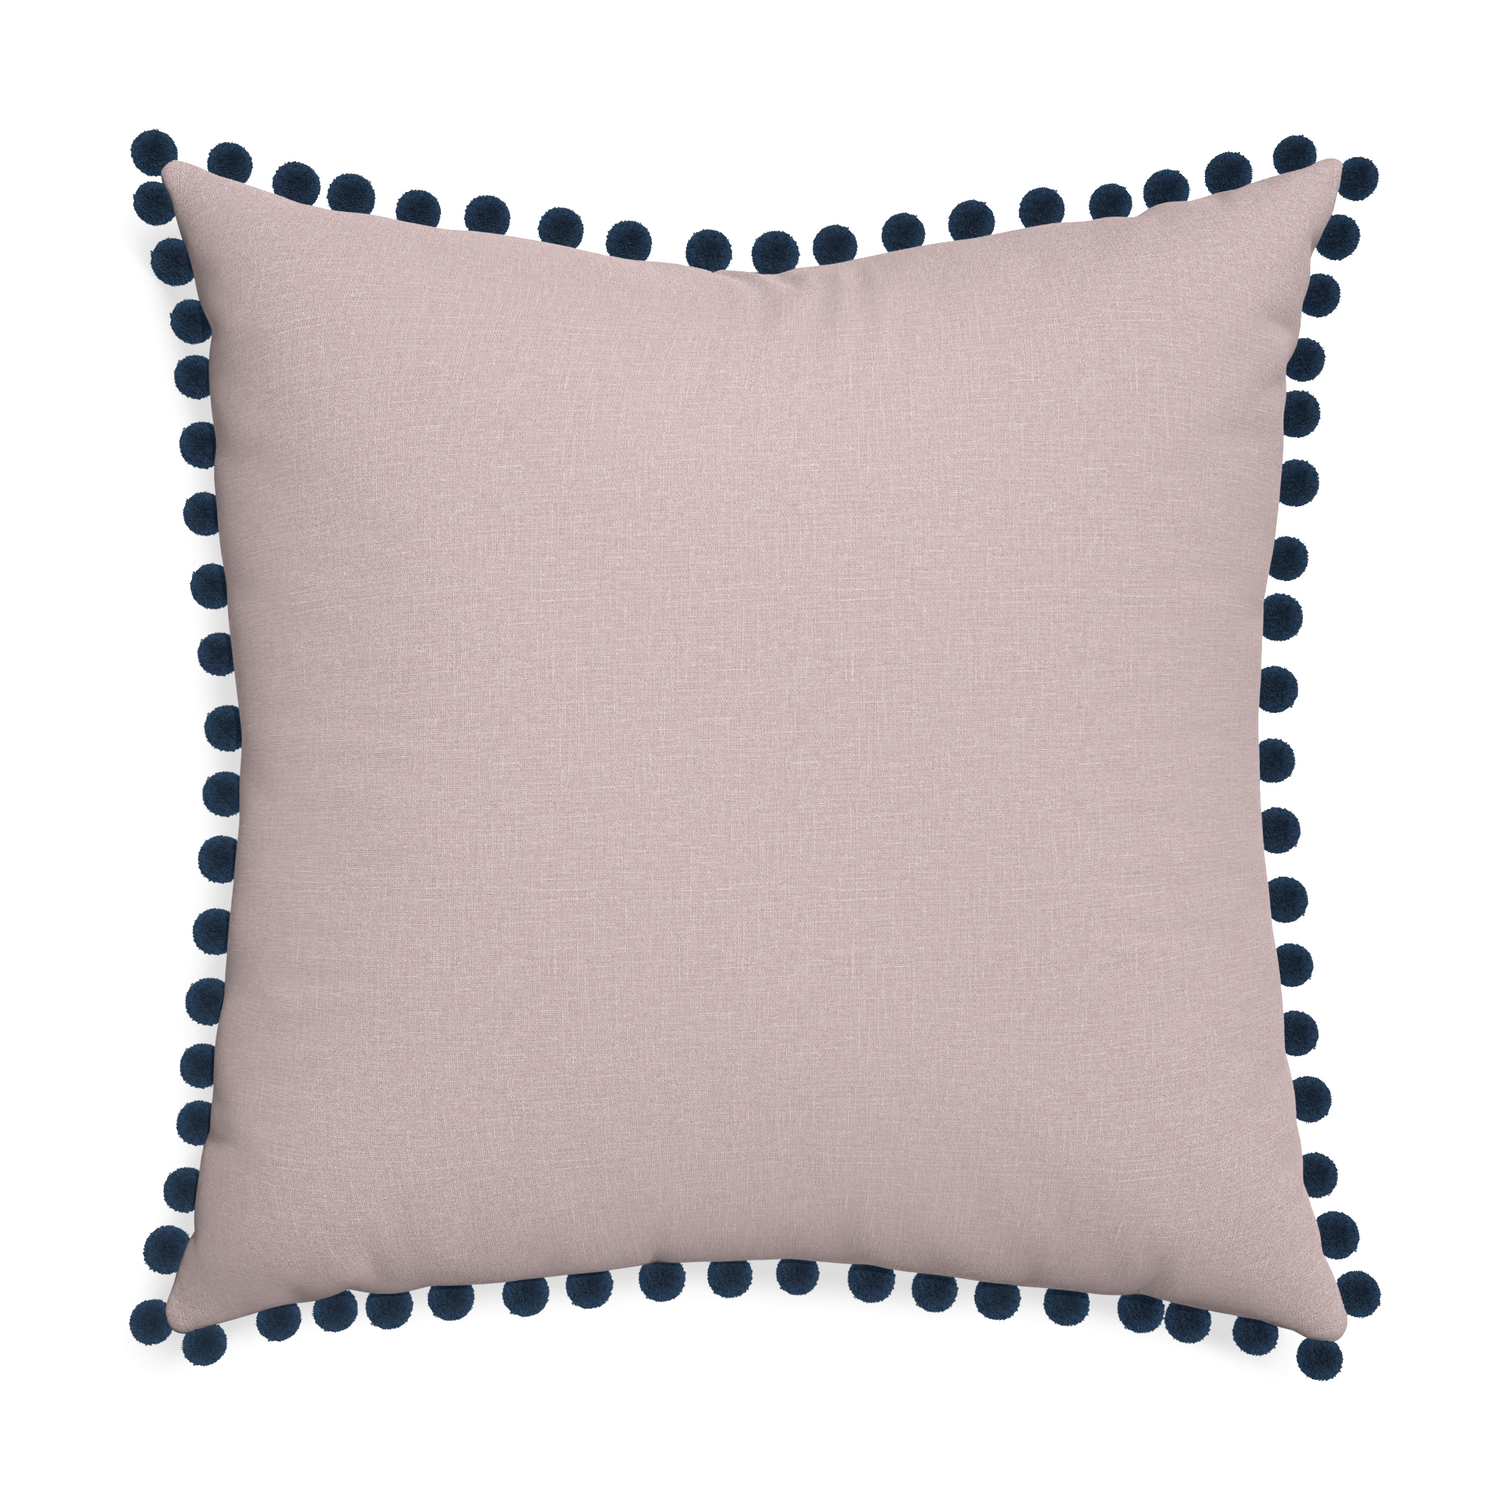 Euro-sham orchid custom mauve pinkpillow with c on white background